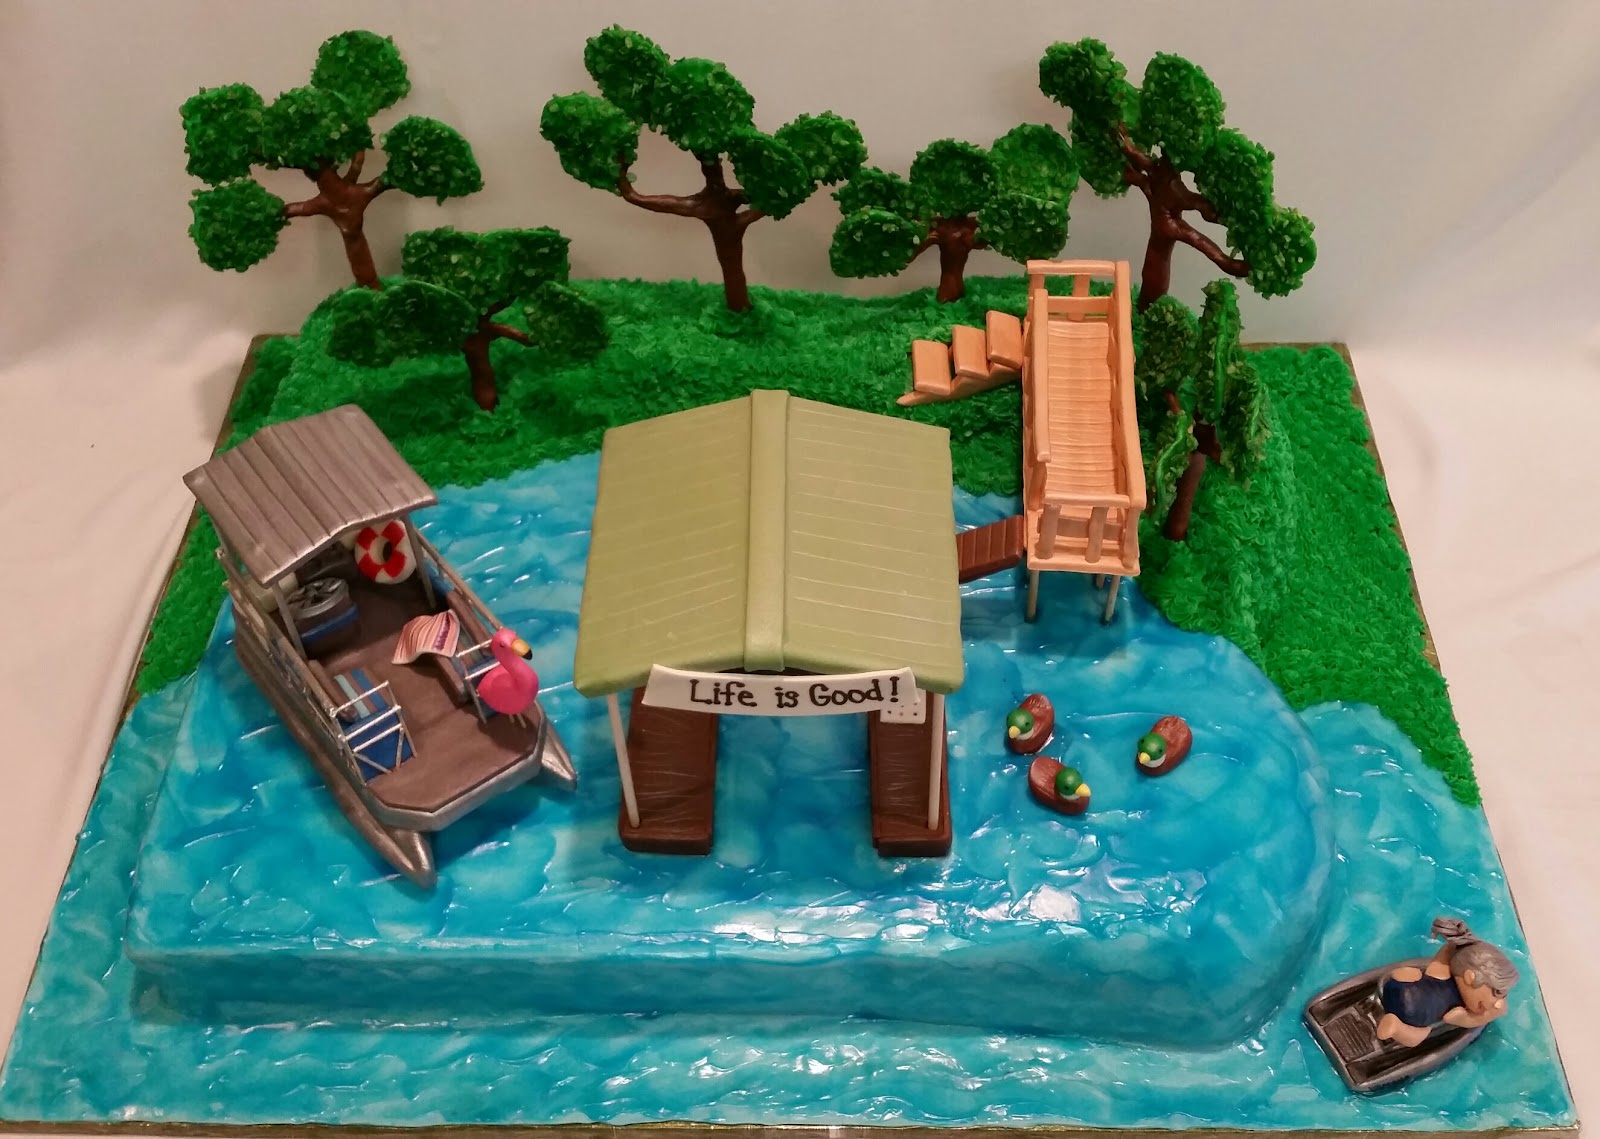 MyMoniCakes: Moon lake replica cake with pontoon boat and 